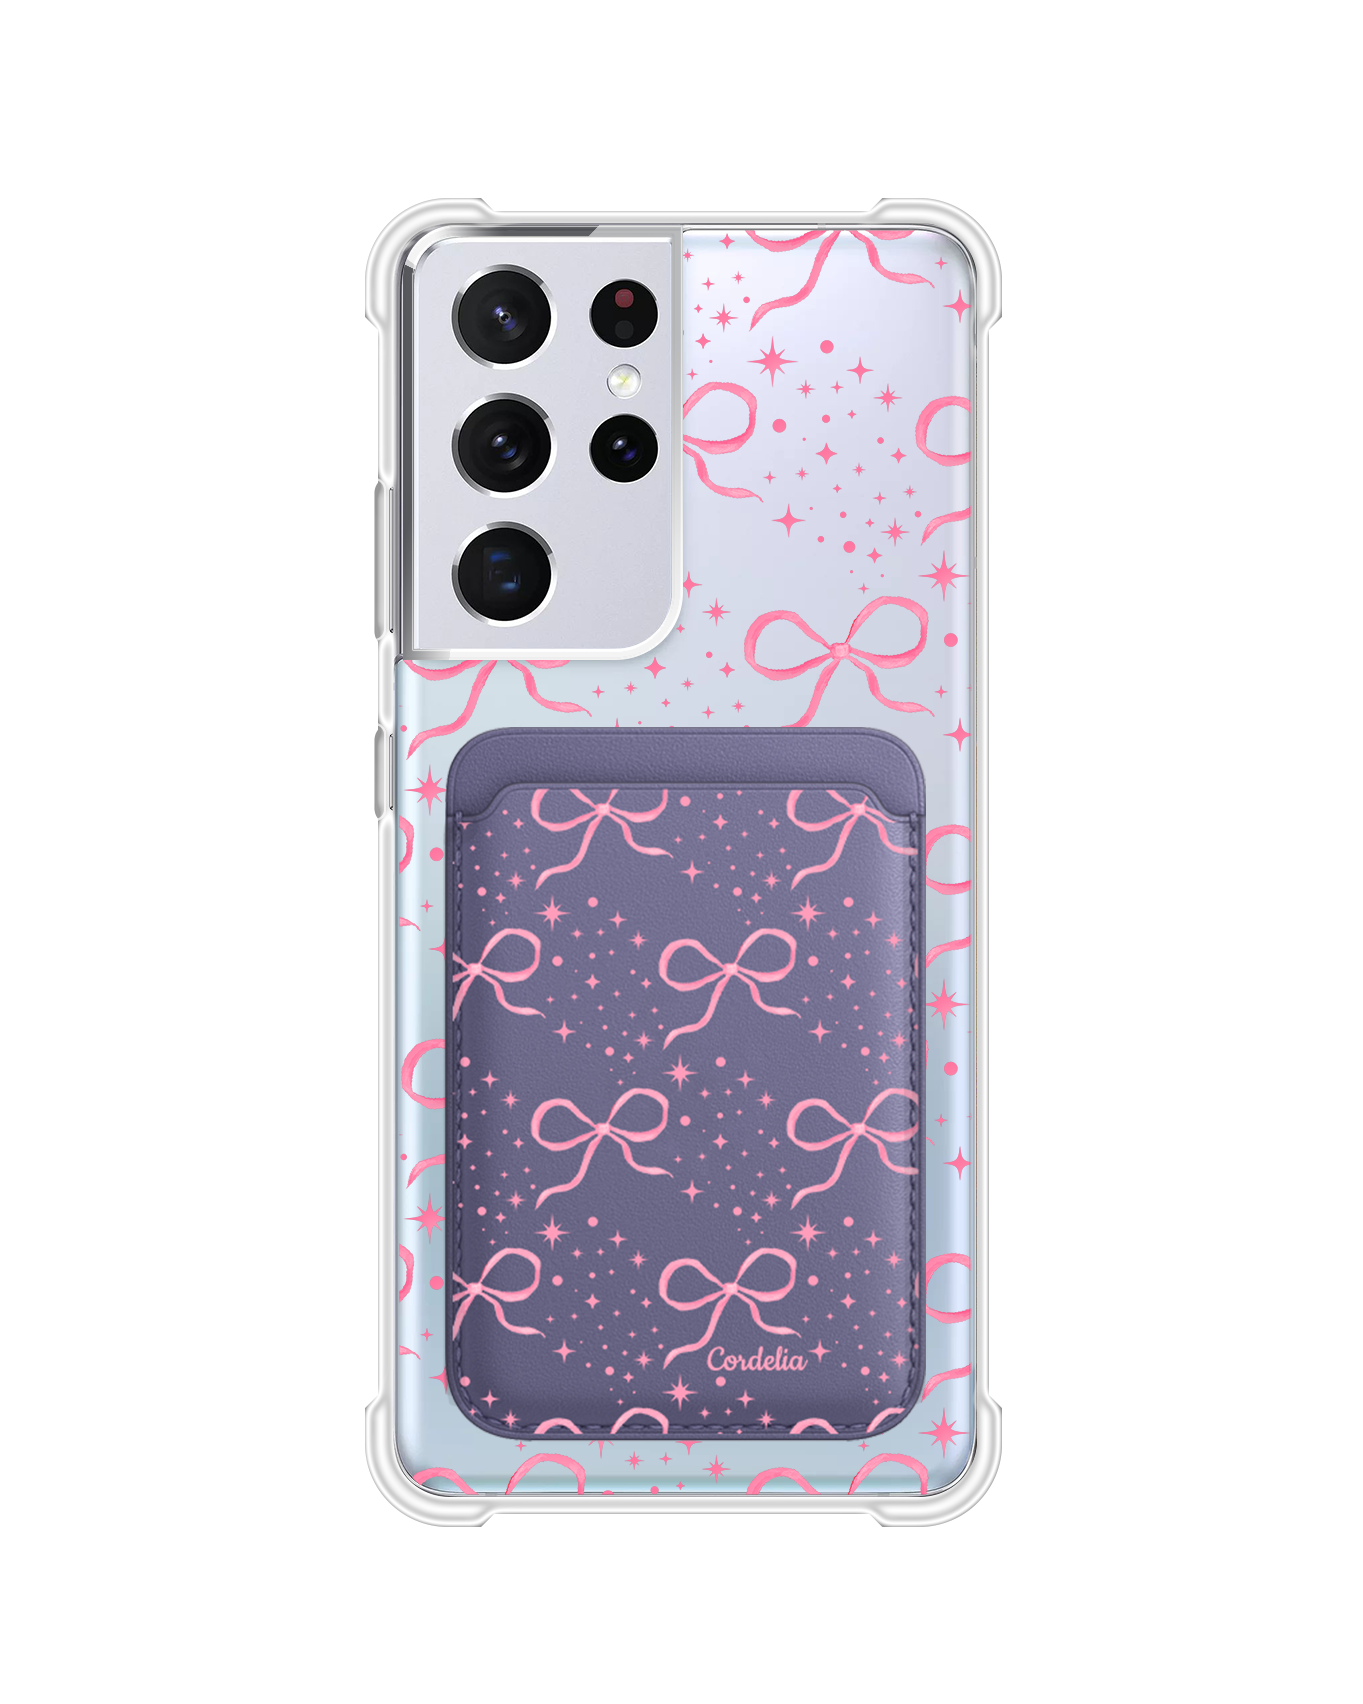 Android Magnetic Wallet Case - Coquette Glittery Bow